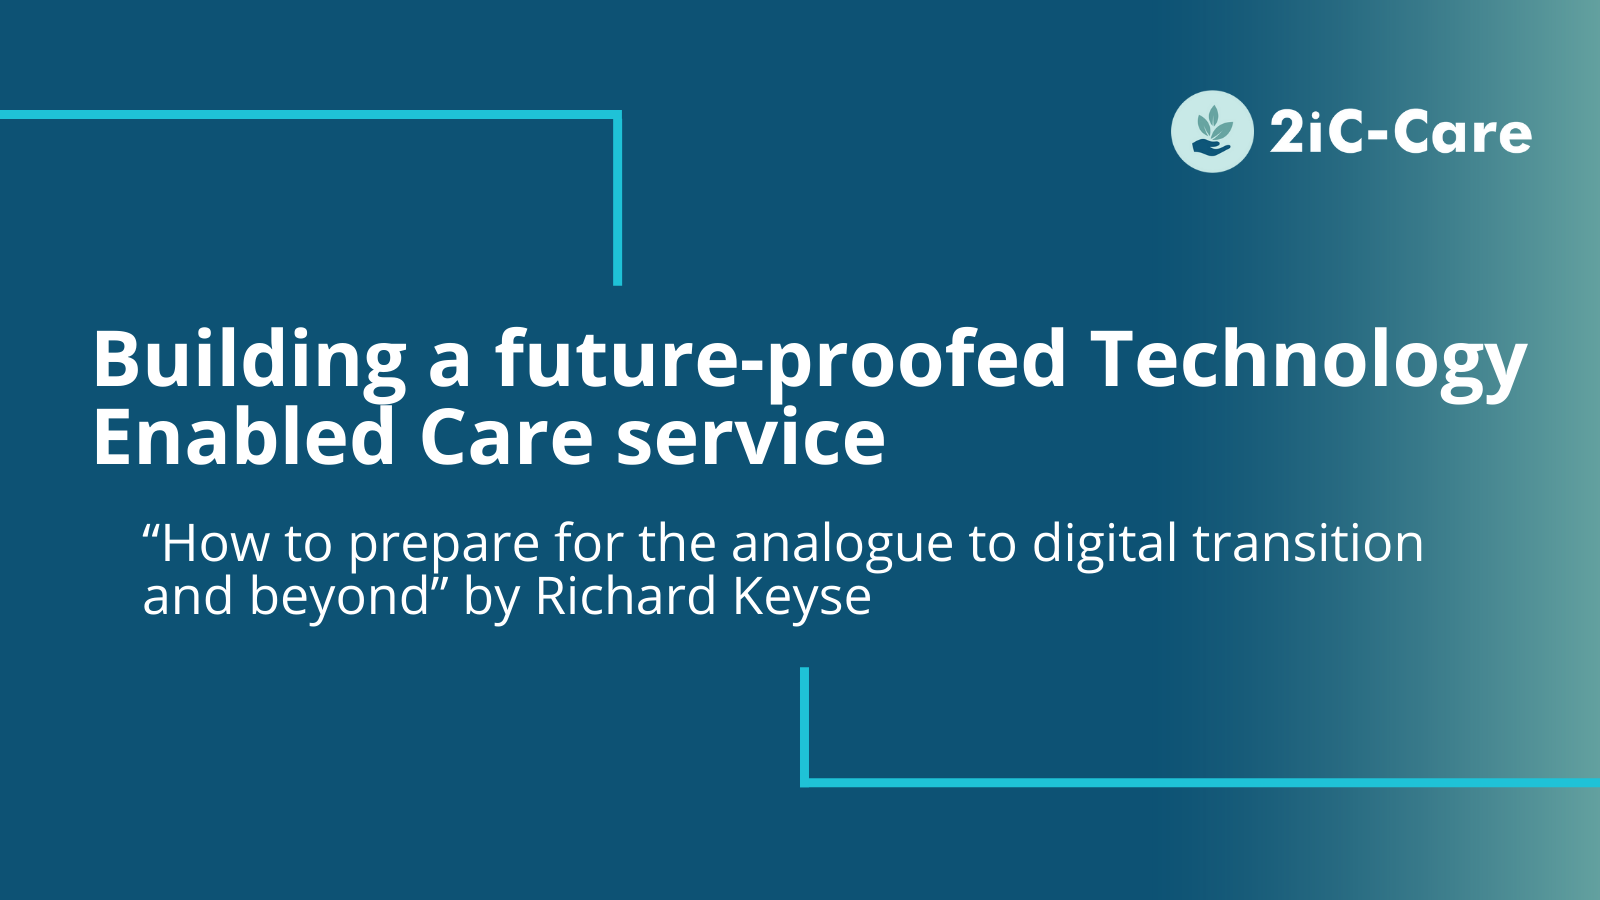 Building a future-proofed technology enabled care service.